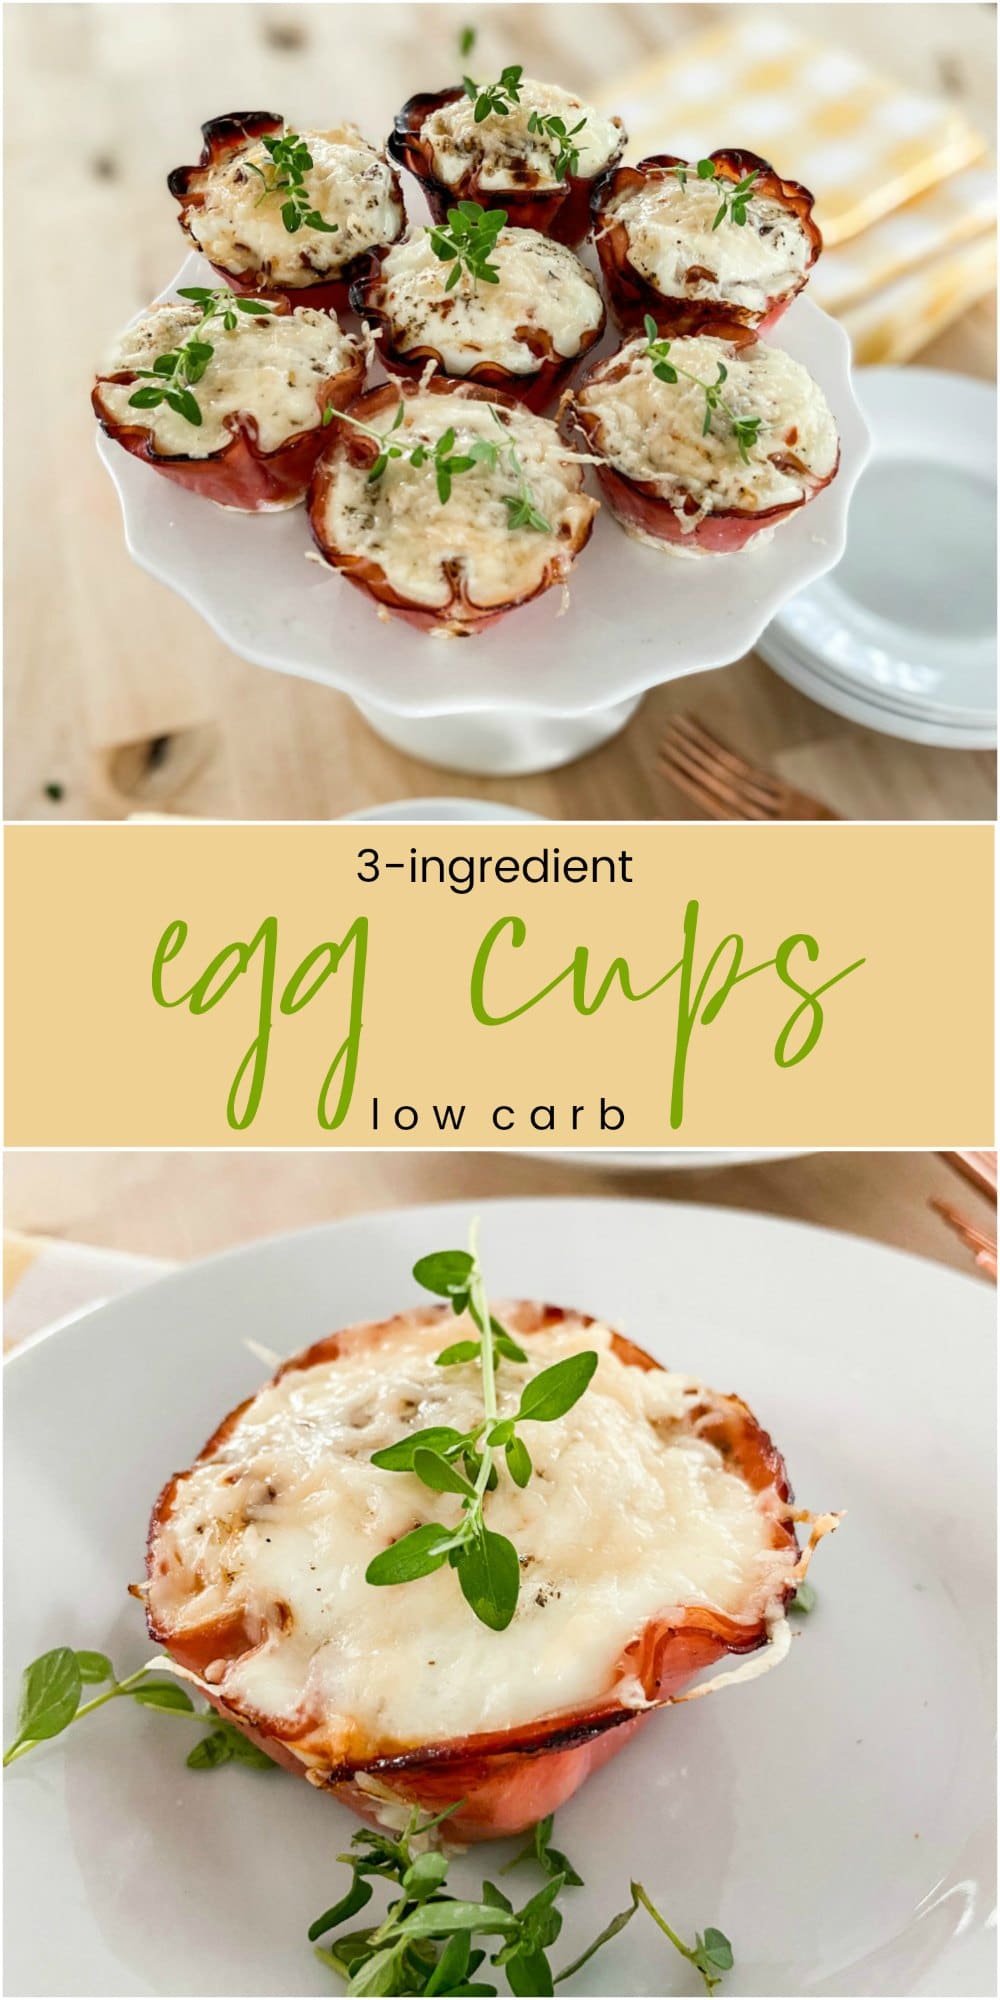 3-Ingredient Low Carb Breakfast Egg Cups. Start your day with this protein-packed low-carb on-the-go breakfast cup that is SO good! 